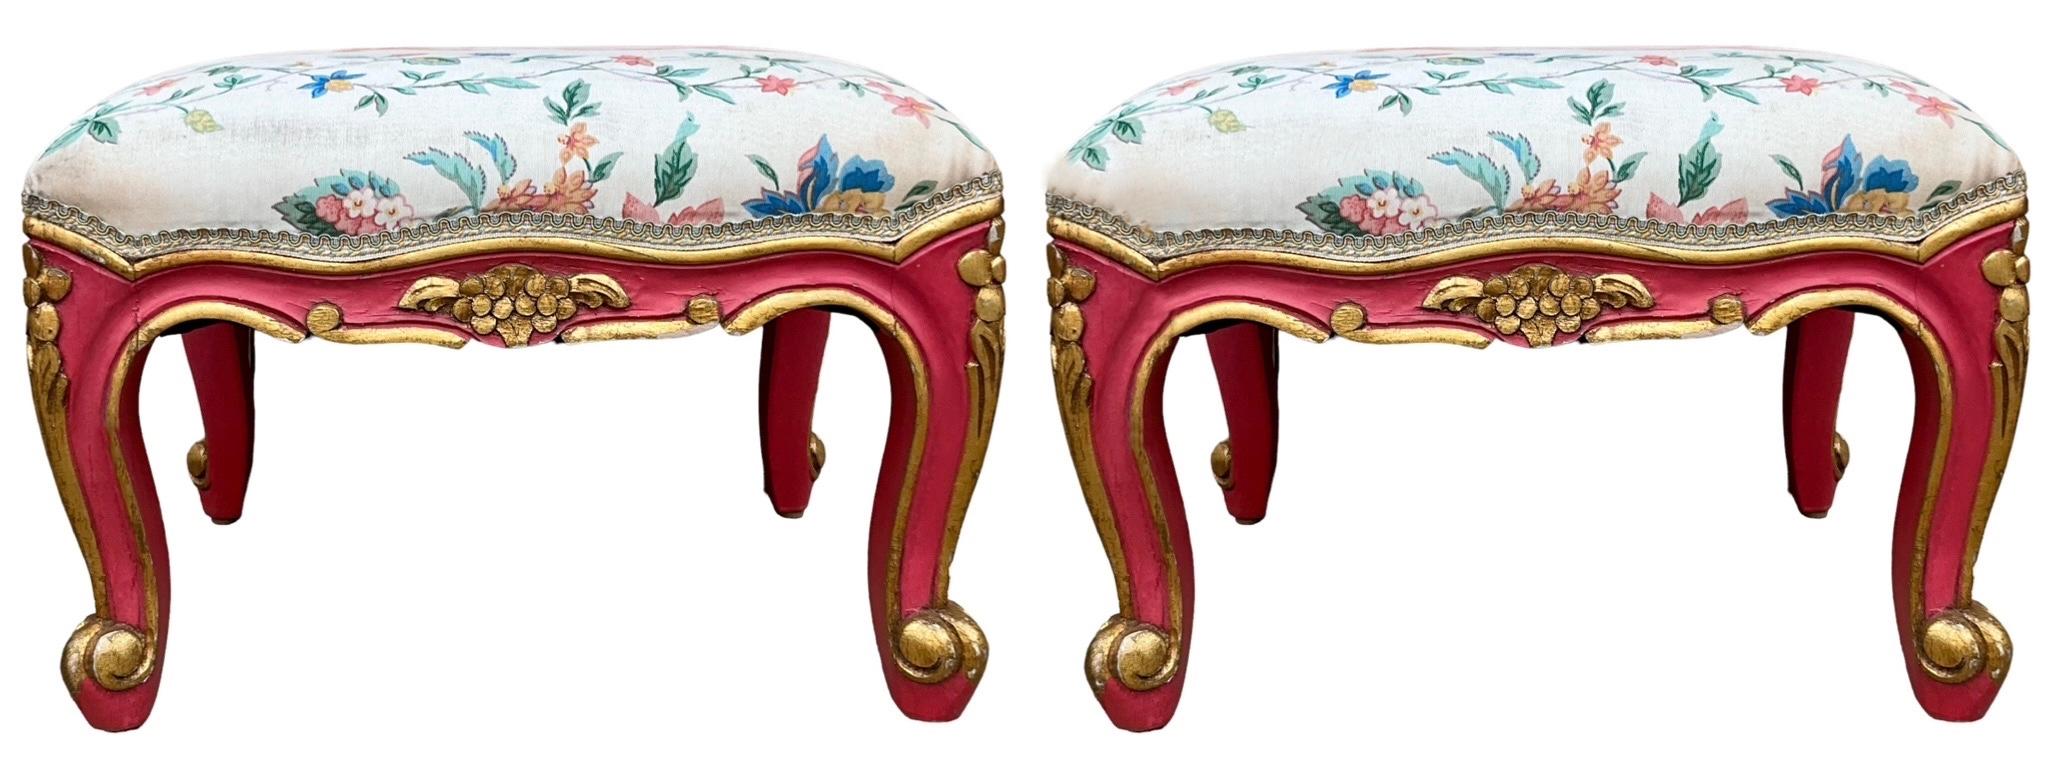 Italian Mid-Century French Louis XVI Style Pink And Gilt Venetian Ottomans / Stools - 2 For Sale